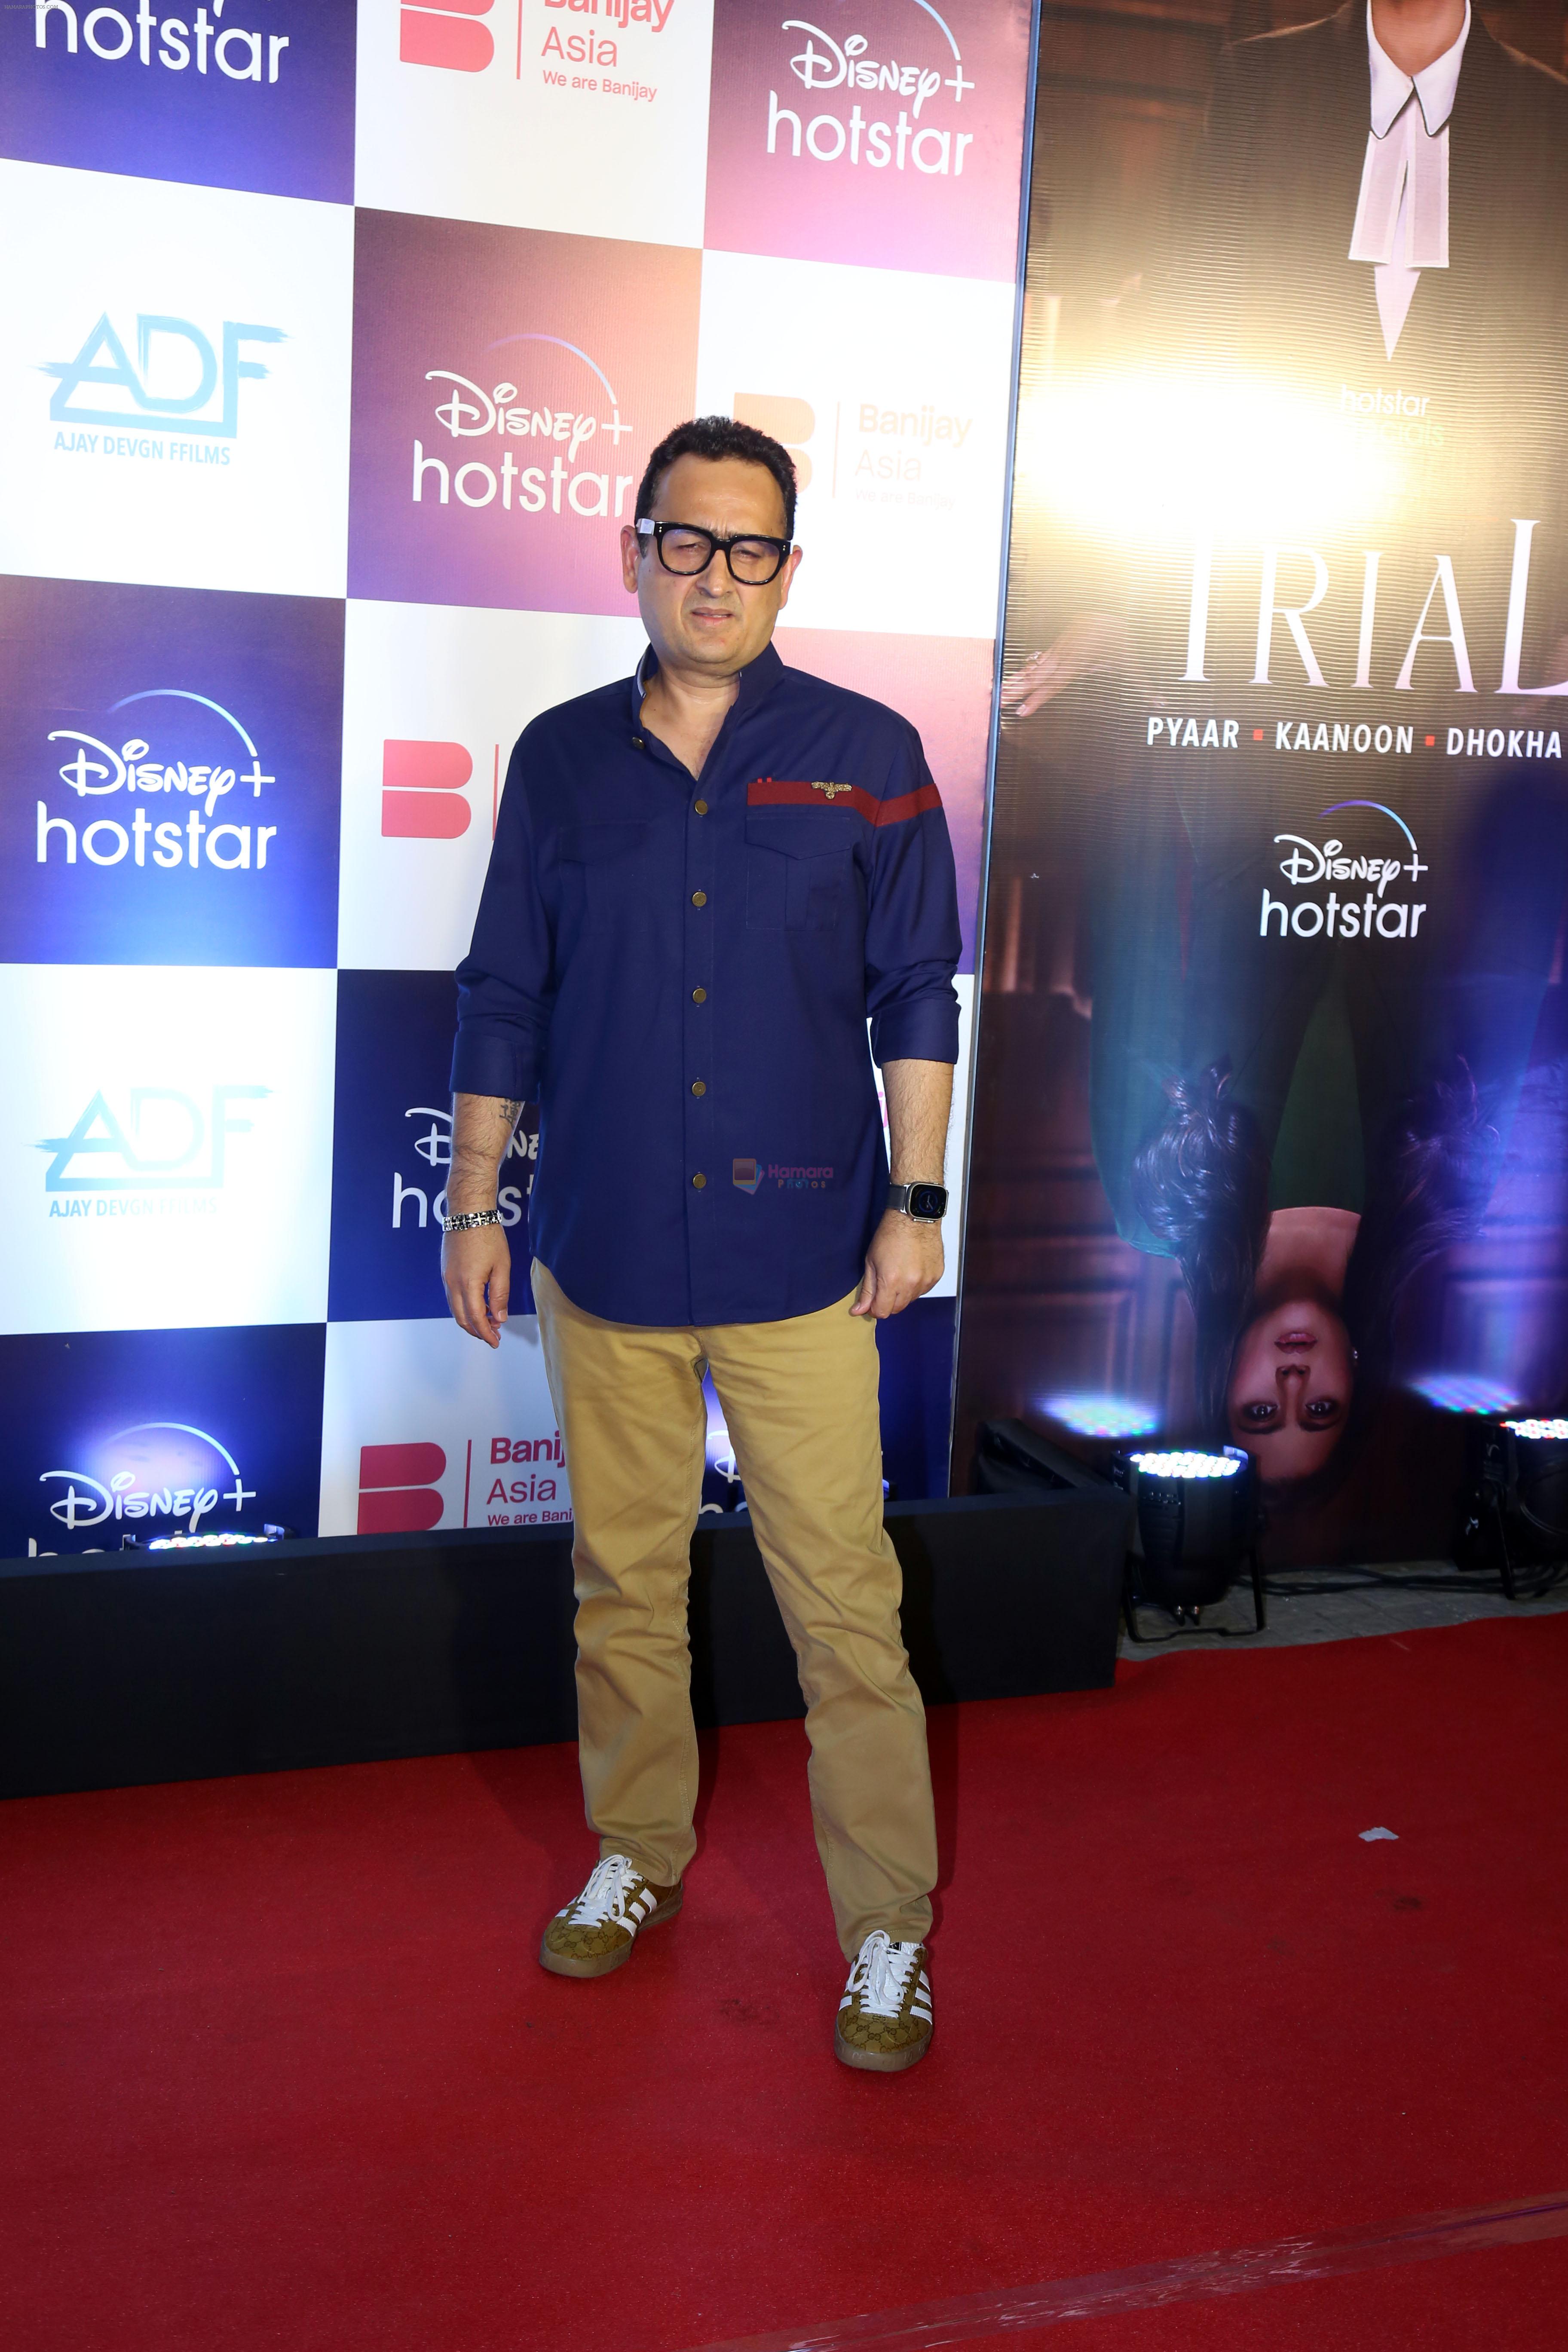 Vinod Bhanushali at the premiere of the series The Trial - Pyaar, Kaanoon, Dhokha on 13 July 2023